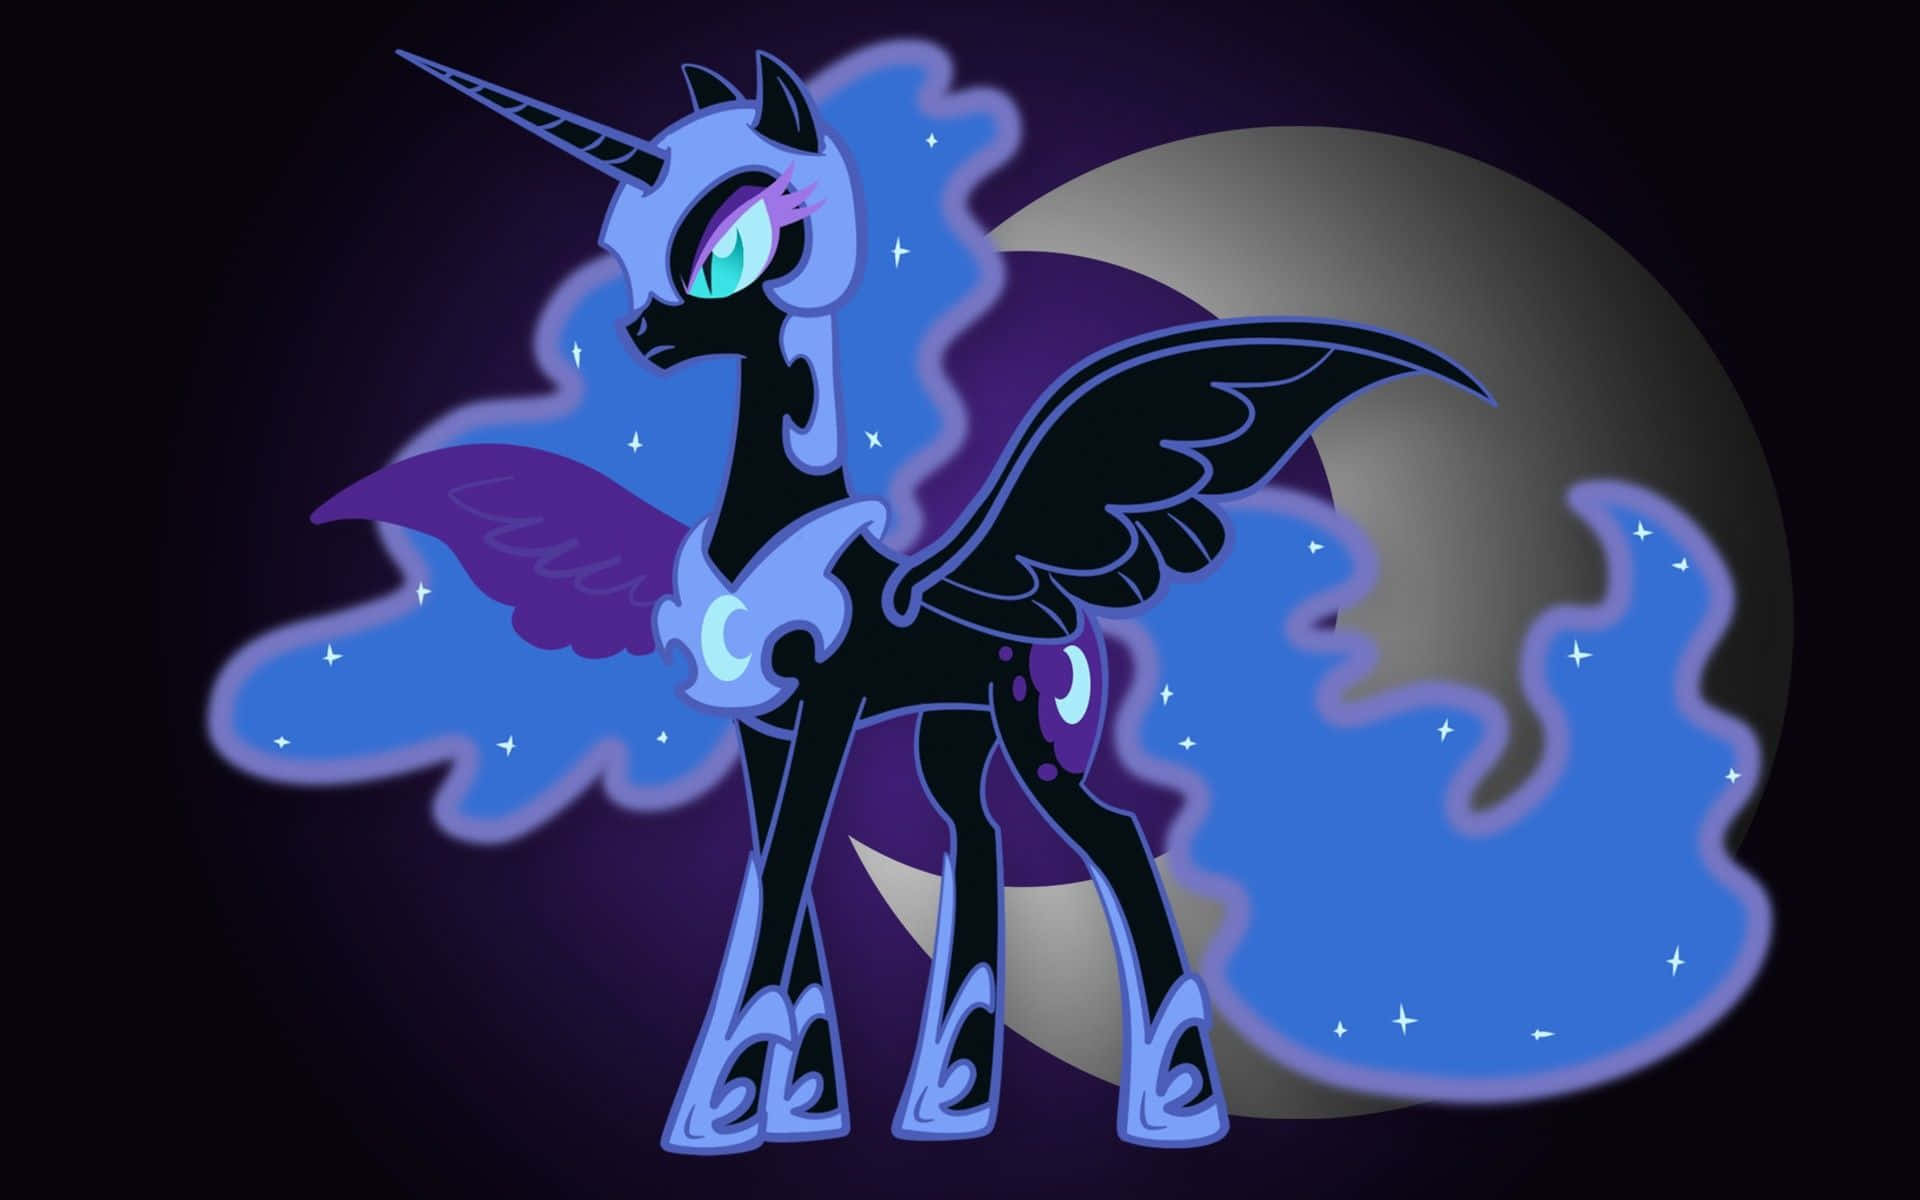 Behold the Wrath of the Eternal Night - Nightmare Moon Wallpaper